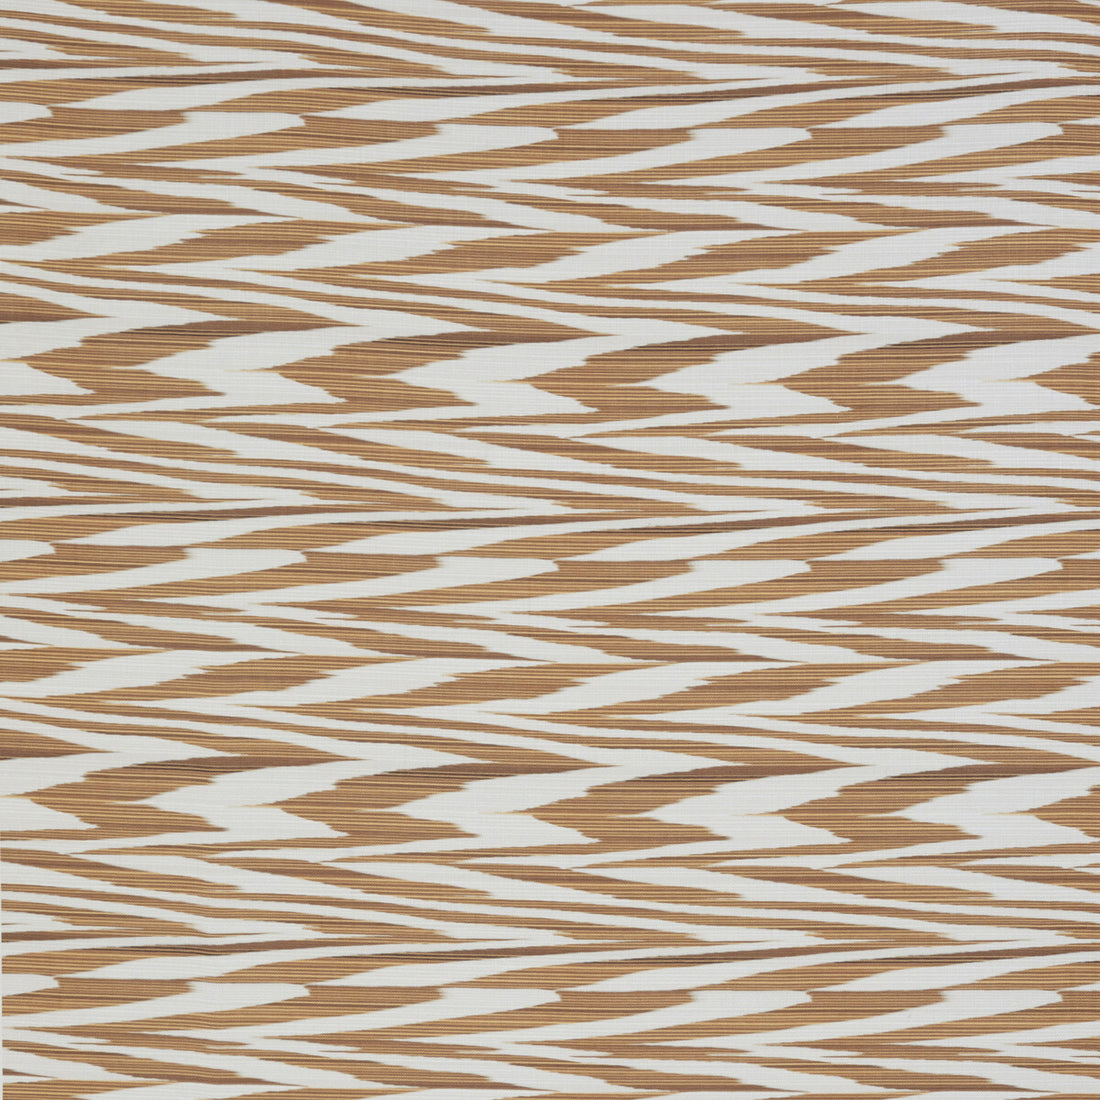 Atacama Outdoor fabric in 621 color - pattern 36156.404.0 - by Kravet Couture in the Missoni Home 2021 collection